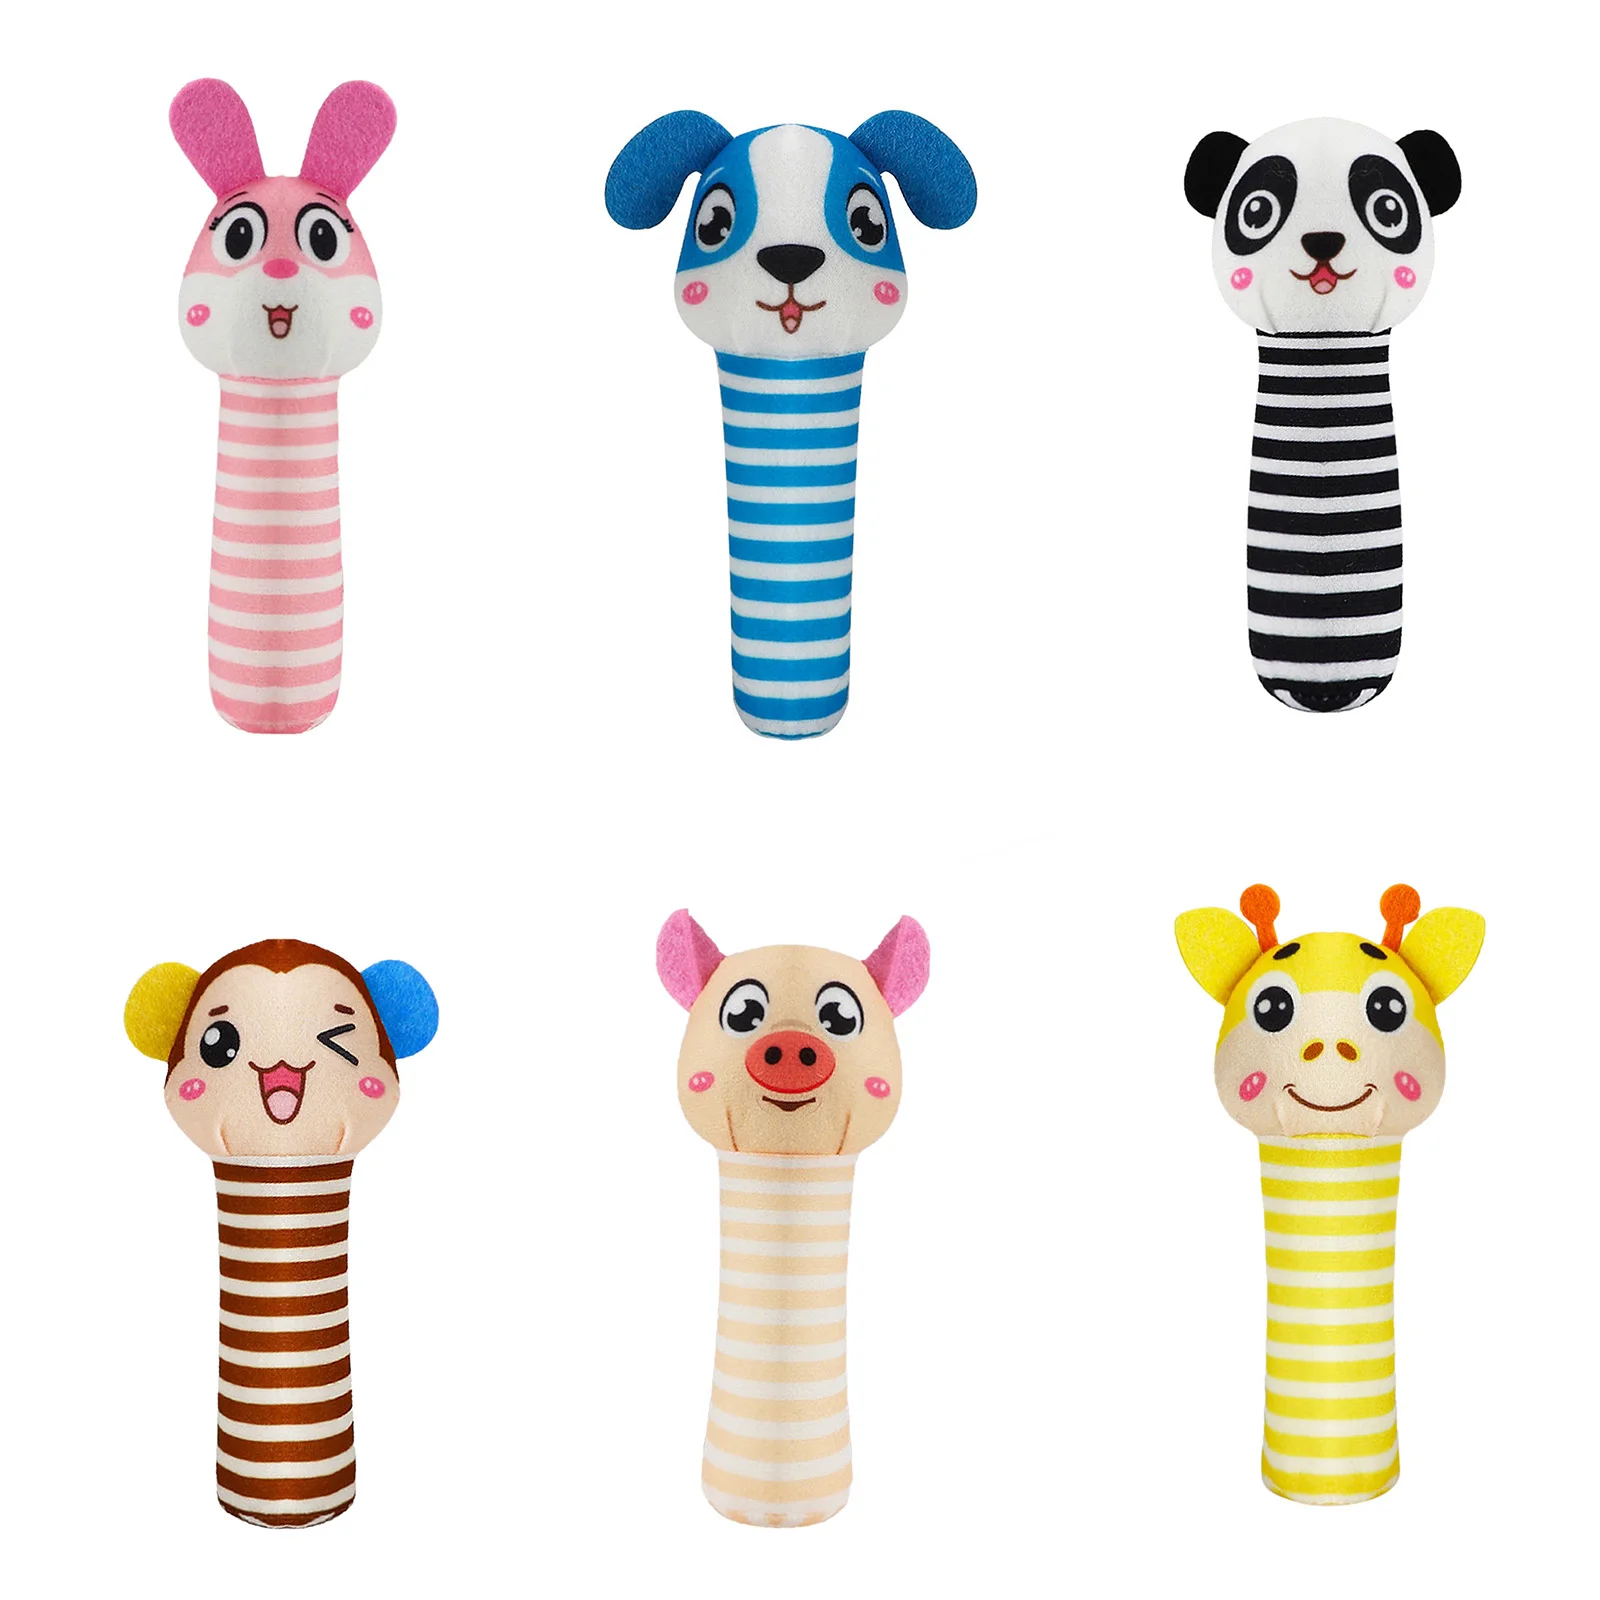 

Newborn Baby Toys 0-12 Months Cartoon Animal Baby Plush Rattle Mobile Bell Toy Infant Toddler Early Educational Toys Bite Tool